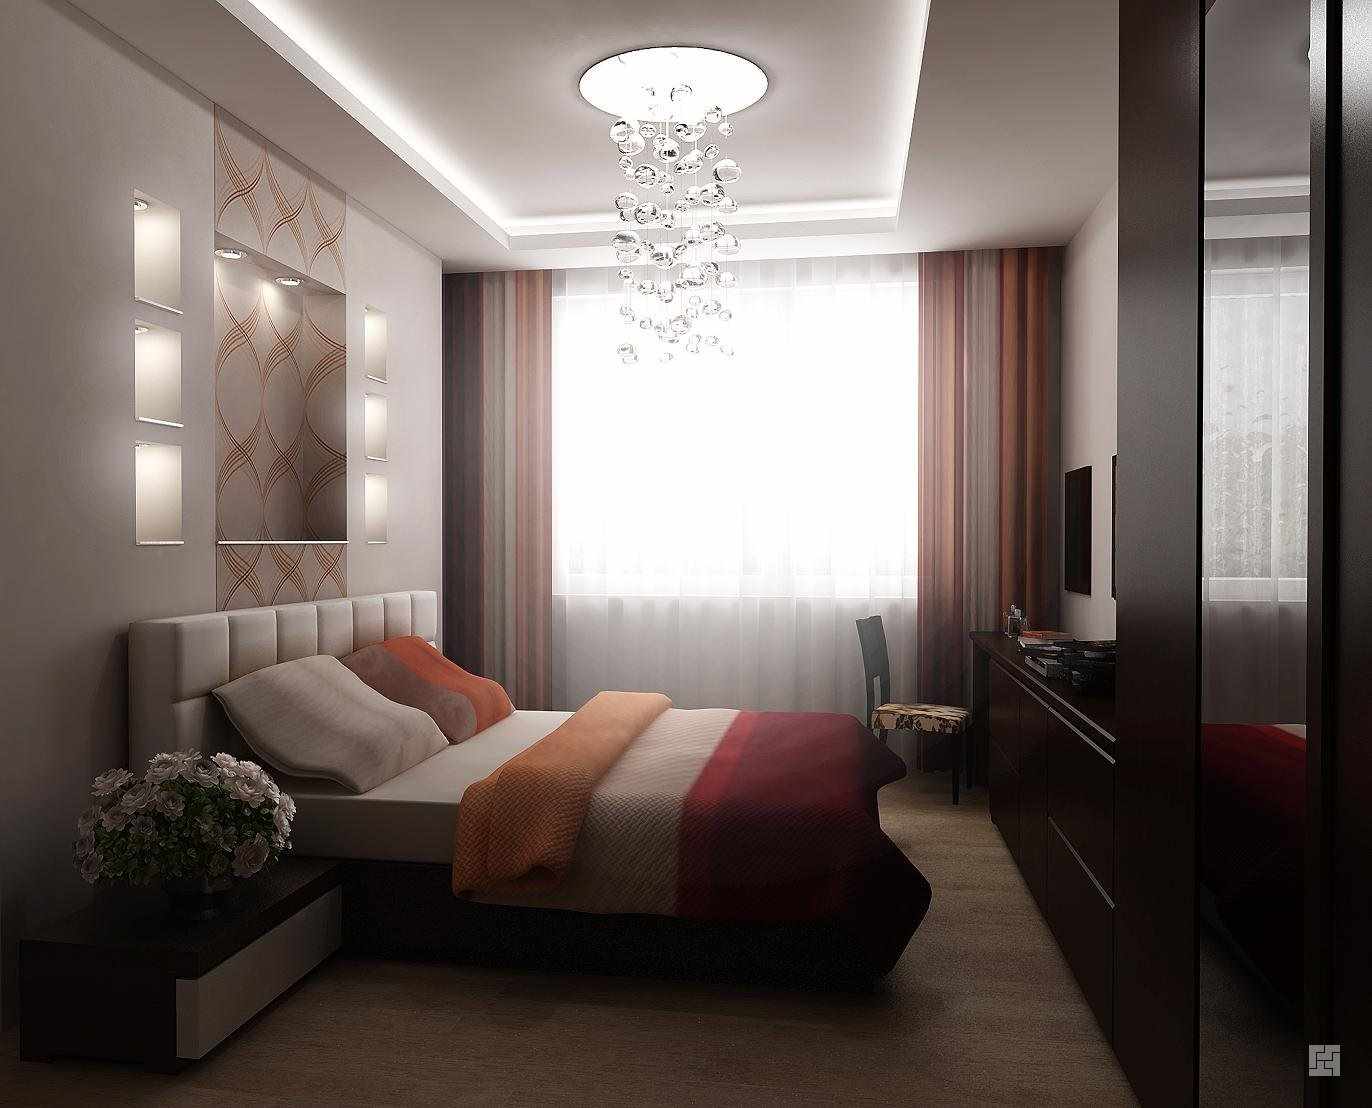 An example of the light style of a narrow bedroom